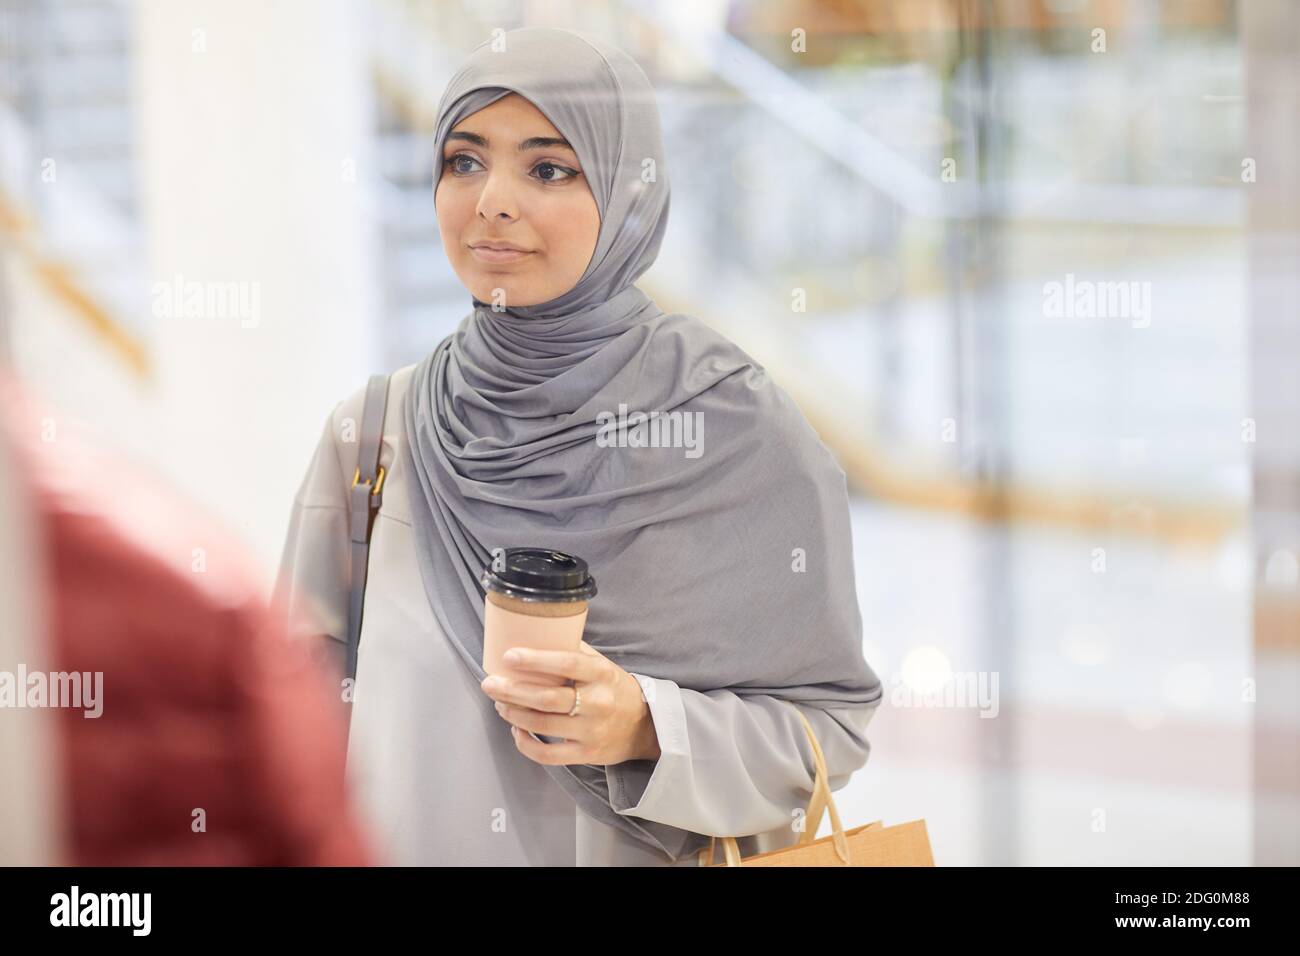 Waist up portrait of young Middle-Eastern woman wearing headscarf and looking at window displays while enjoying shopping in mall, copy space Stock Photo